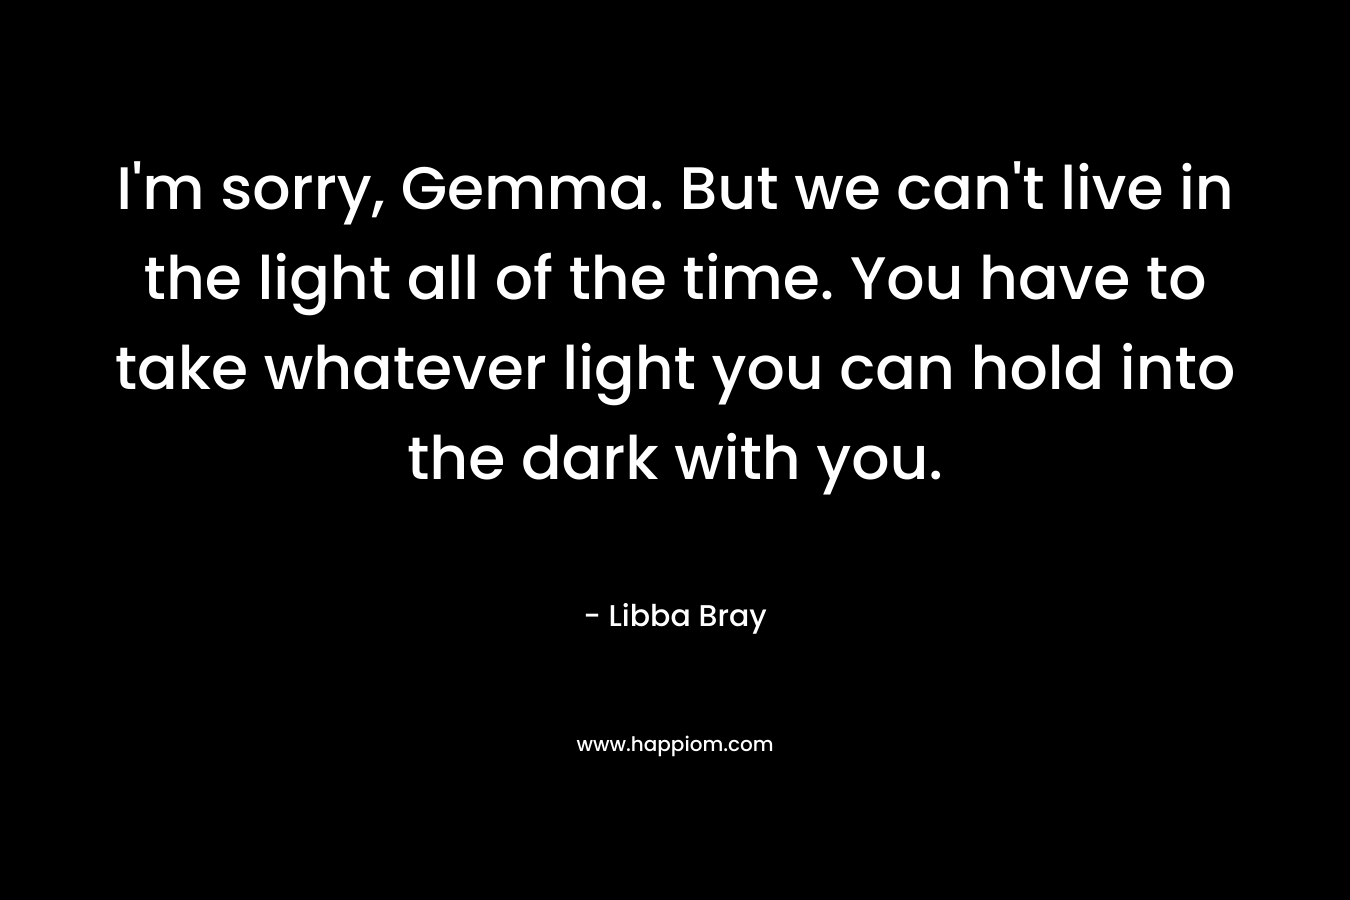 I'm sorry, Gemma. But we can't live in the light all of the time. You have to take whatever light you can hold into the dark with you.